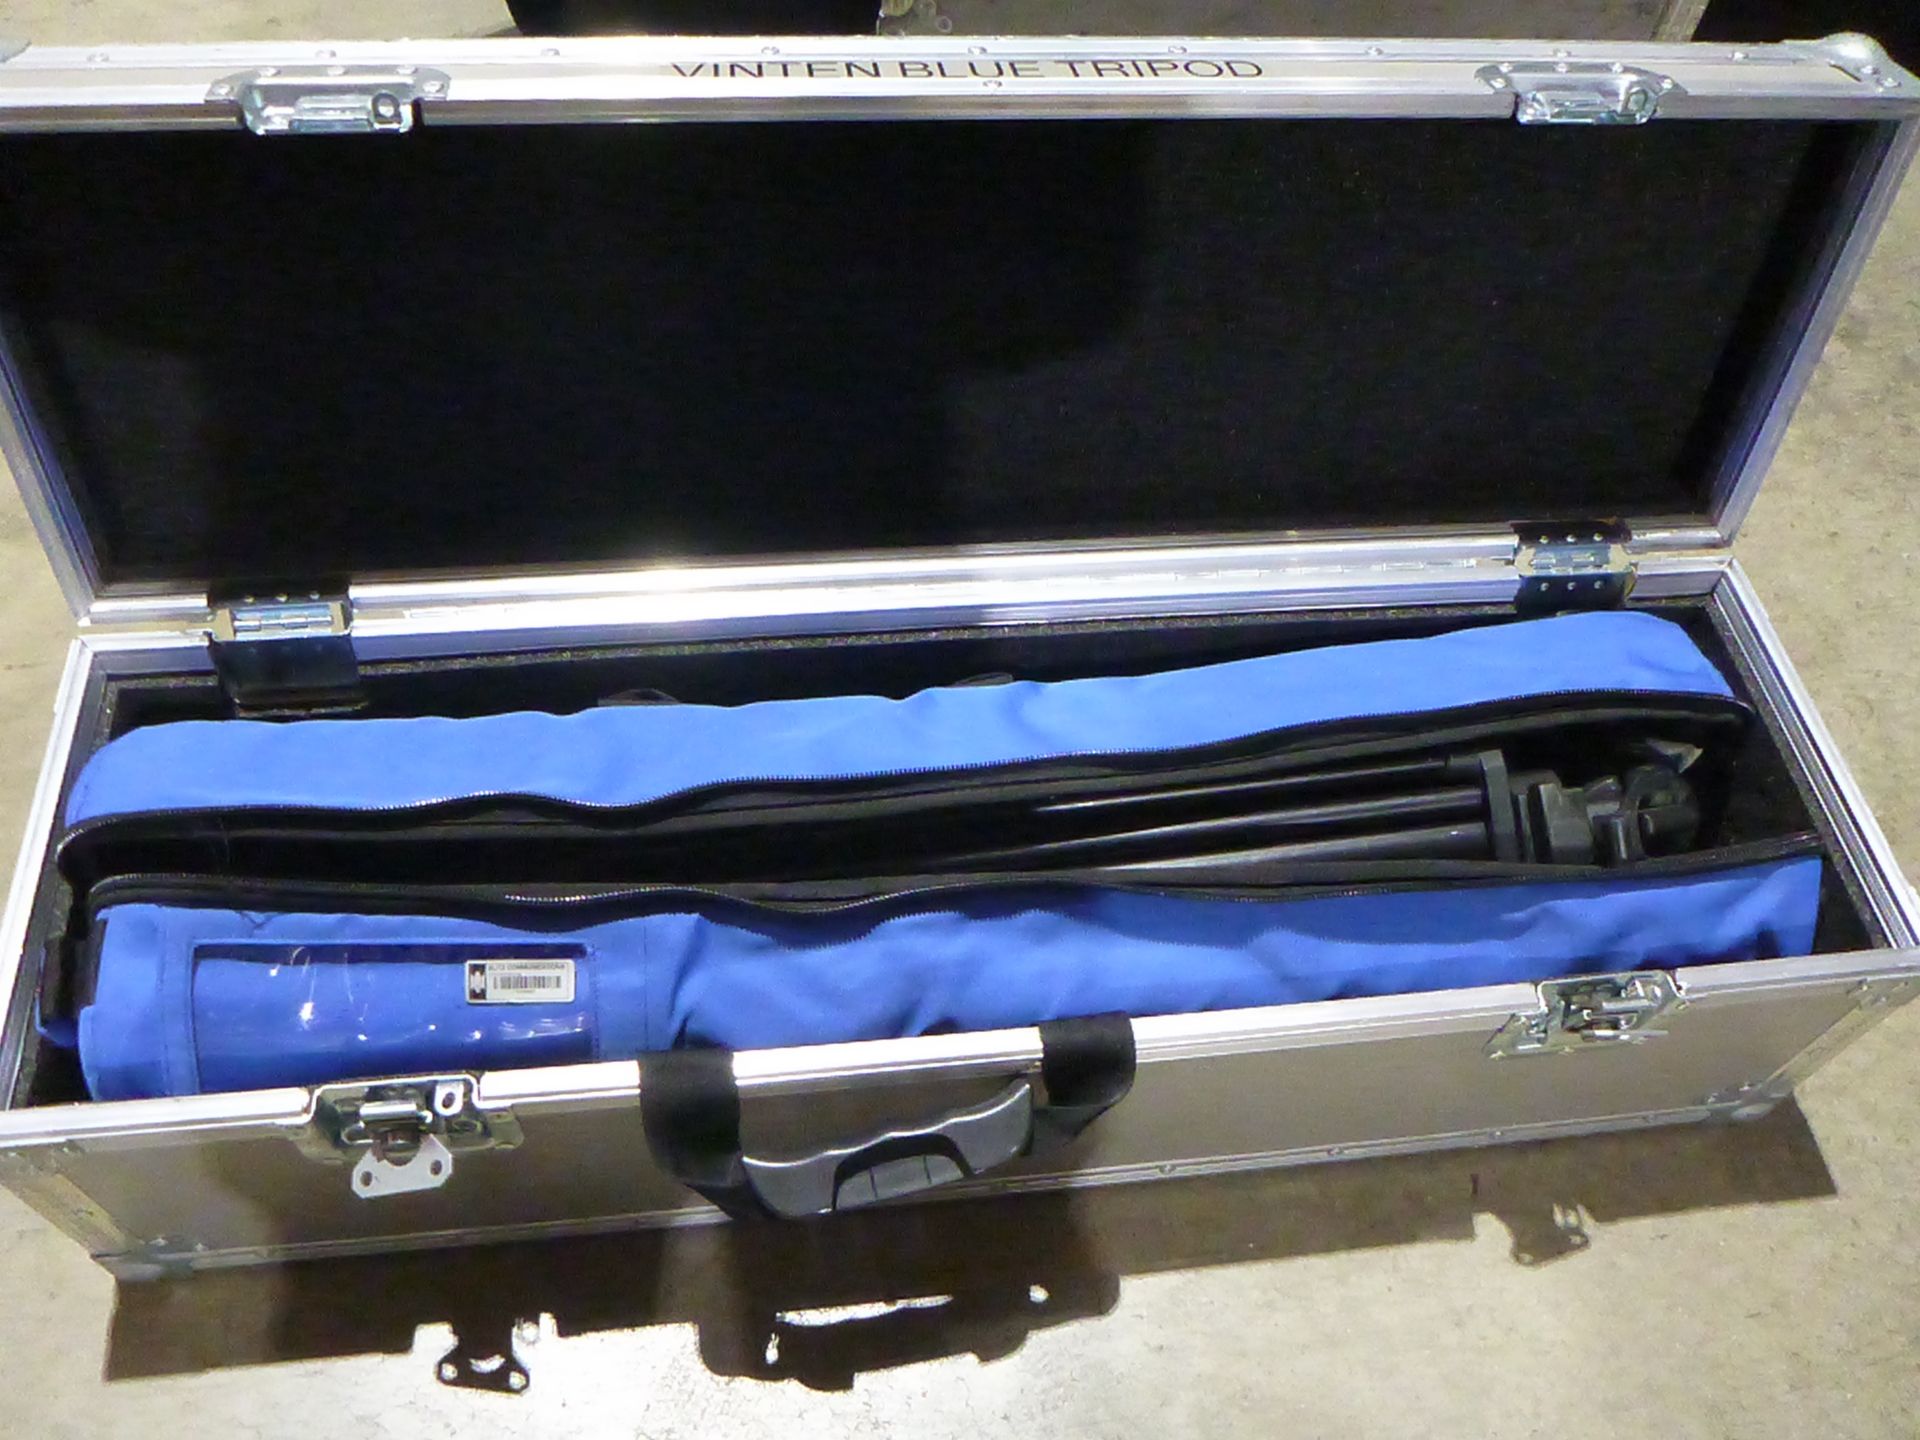 Vinton Camera Tripod, Model Vision Blue, In carry and flight case - Image 3 of 4